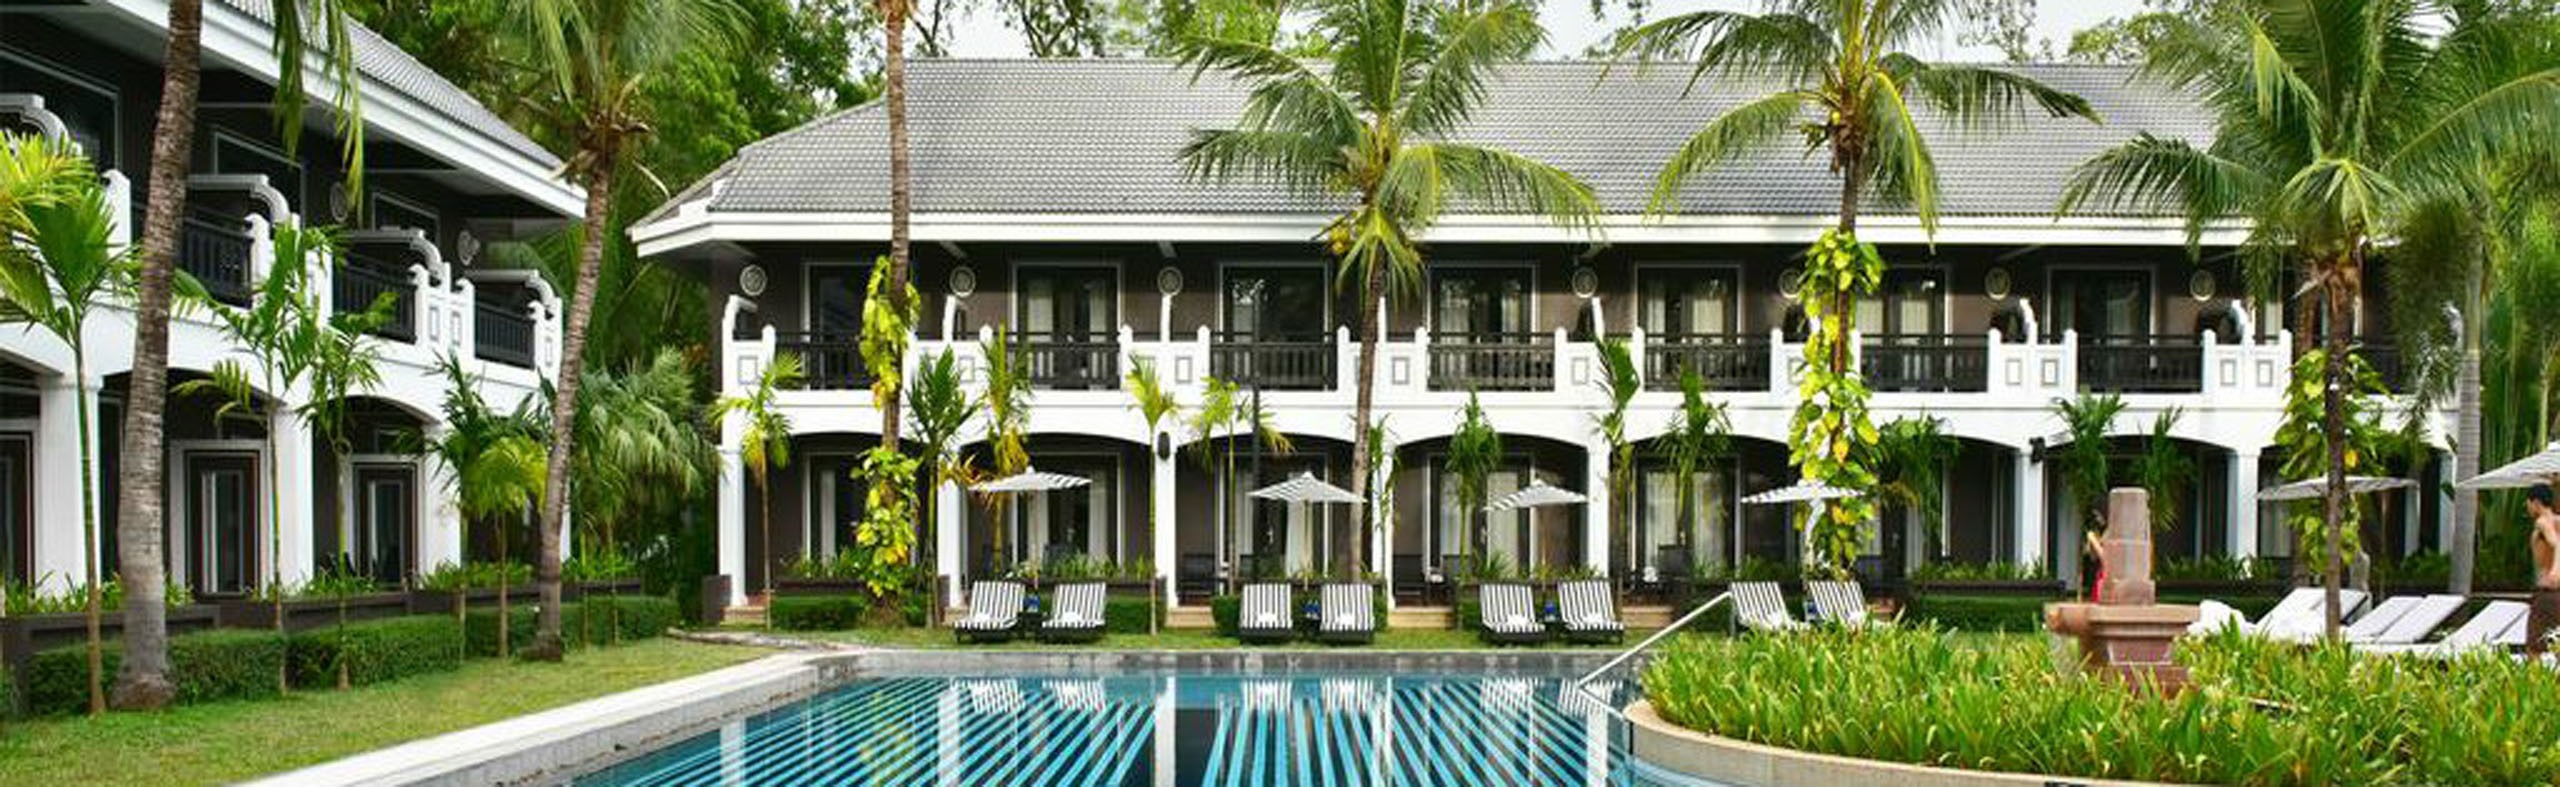 Where to Stay in Cambodia, Recommended Hotels to Stay In